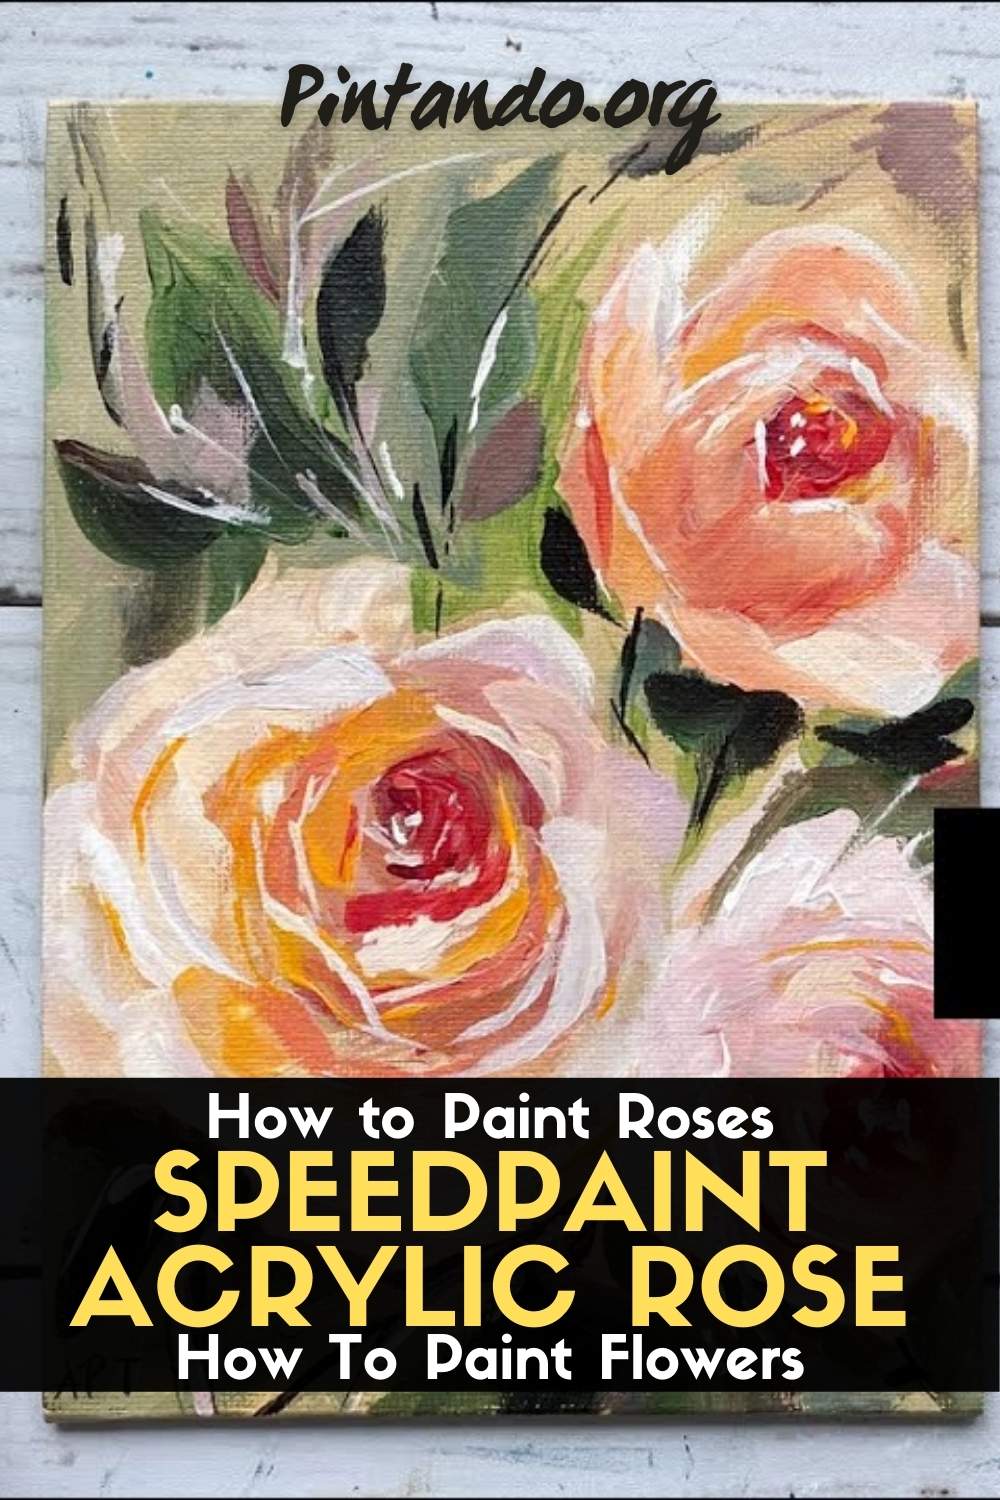 How to Paint Roses Speedpaint Acrylic Rose How To Paint Flowers